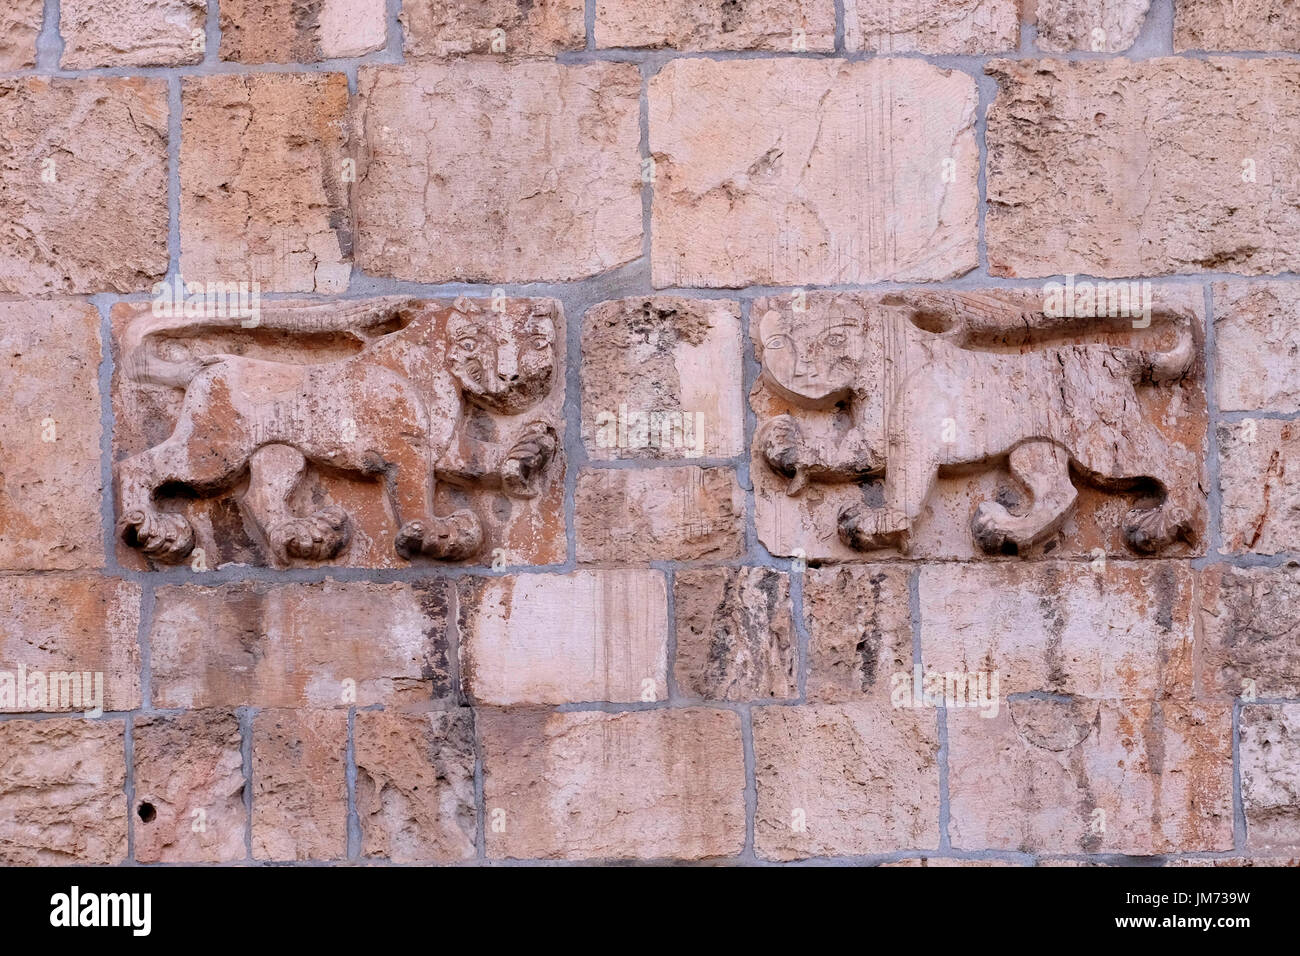 Heraldic emblem of Mamluk Sultan Baybars in shape of lions on the 16th century Lion's or St Stephen's Gate also Bab al-Asbat in the Ottoman wall located at the eastern edge of the Old City of Jerusalem Israel Stock Photo